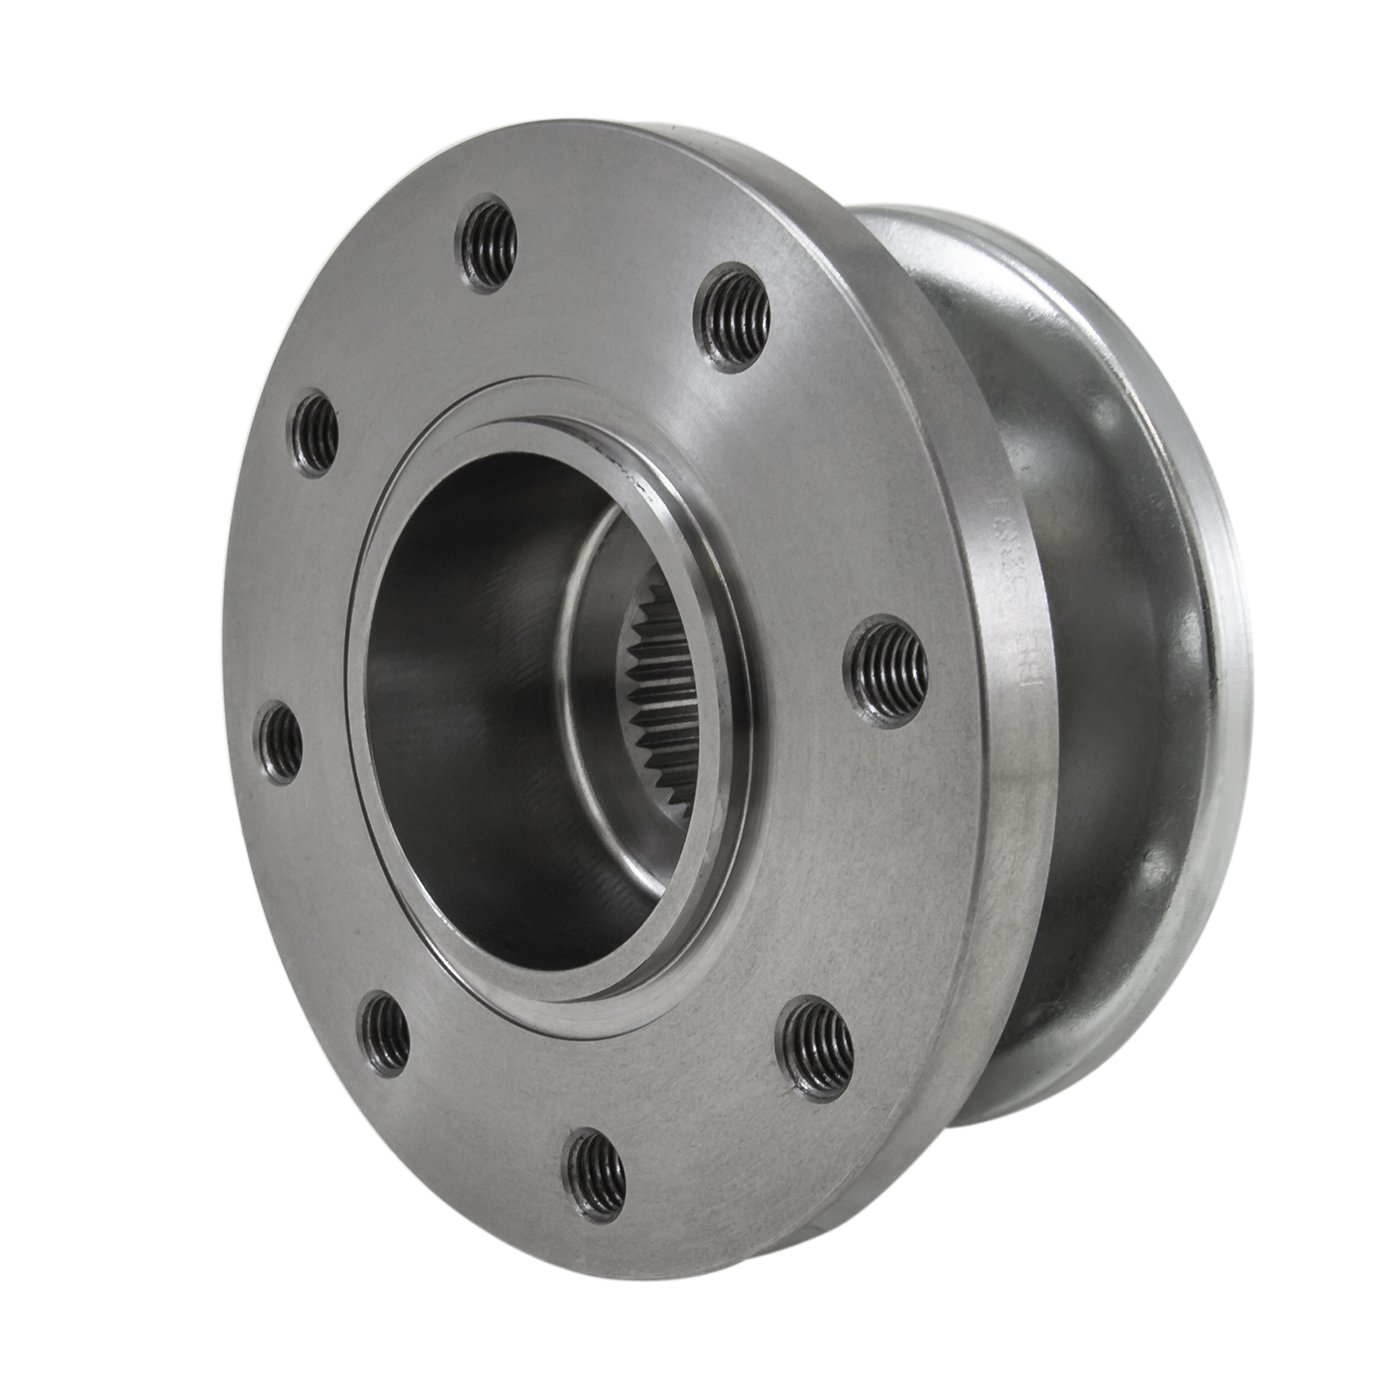 Round Replacement Yoke Companion Flange For Dana 60 And 70.